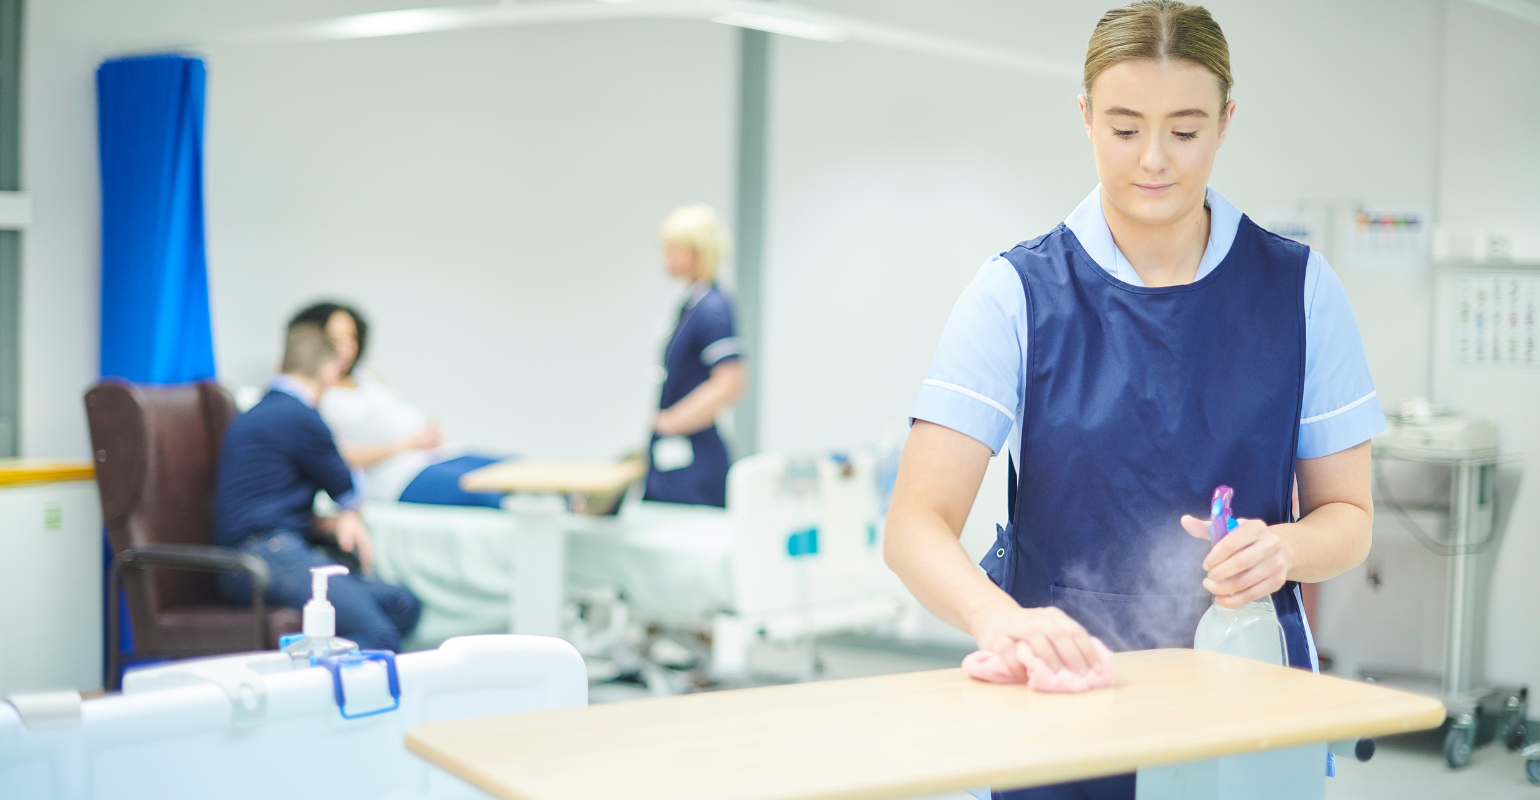 Environmental cleaning gains prominence for infection control